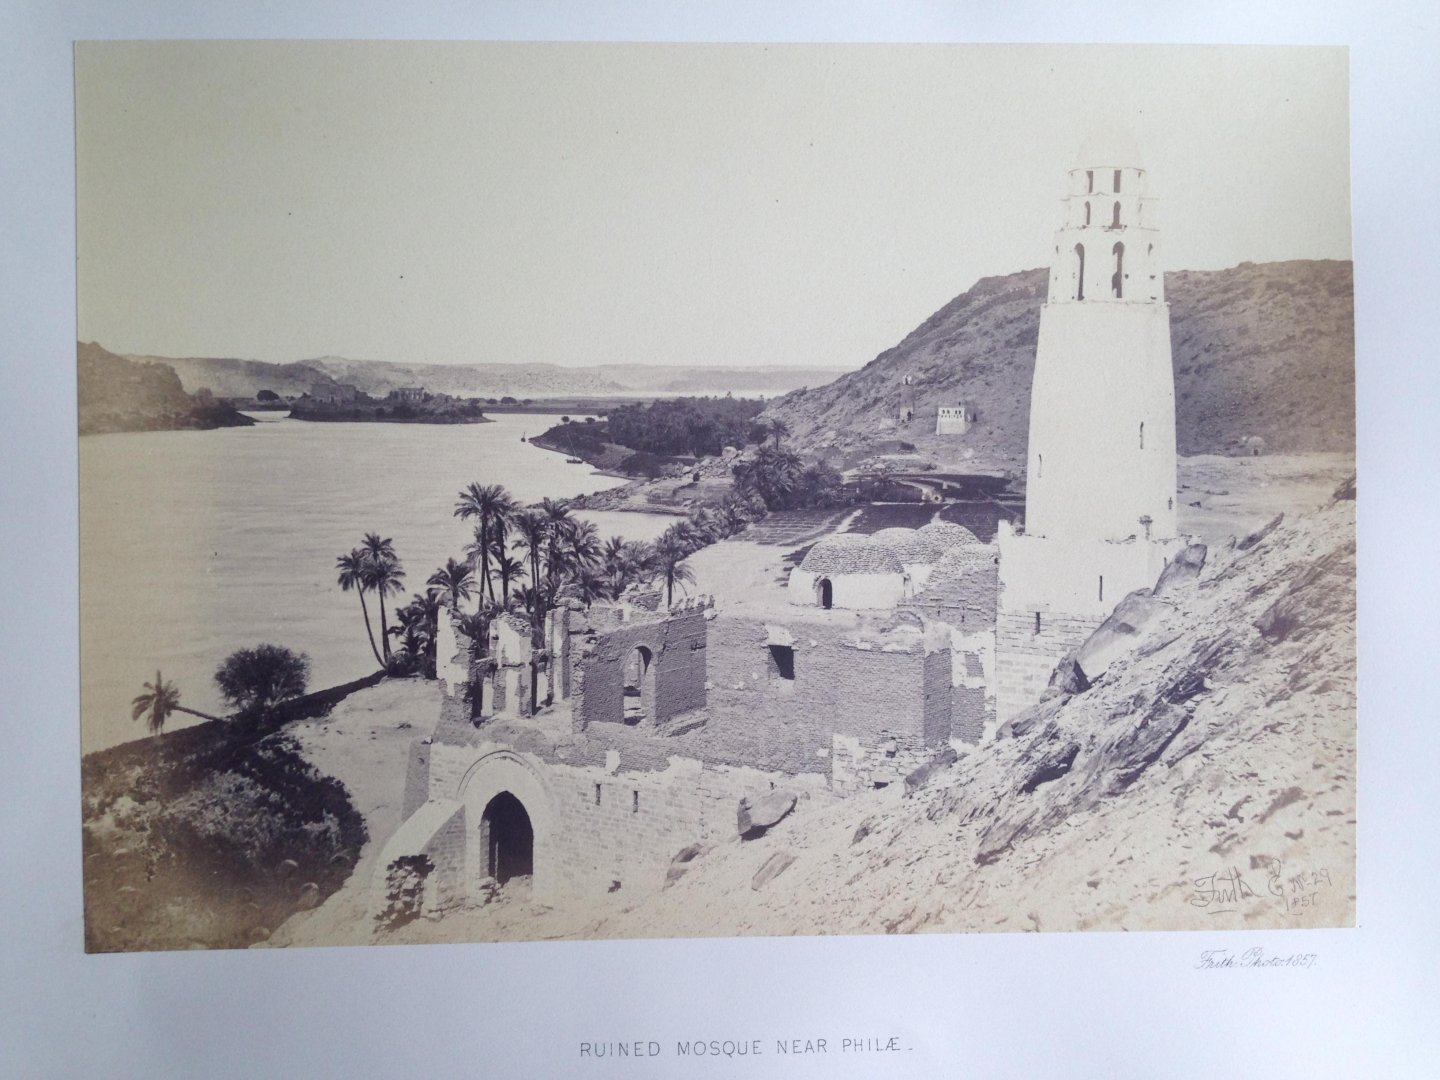 Frith, Francis - Ruined Mosque near Philae, Series Egypt and Palestine